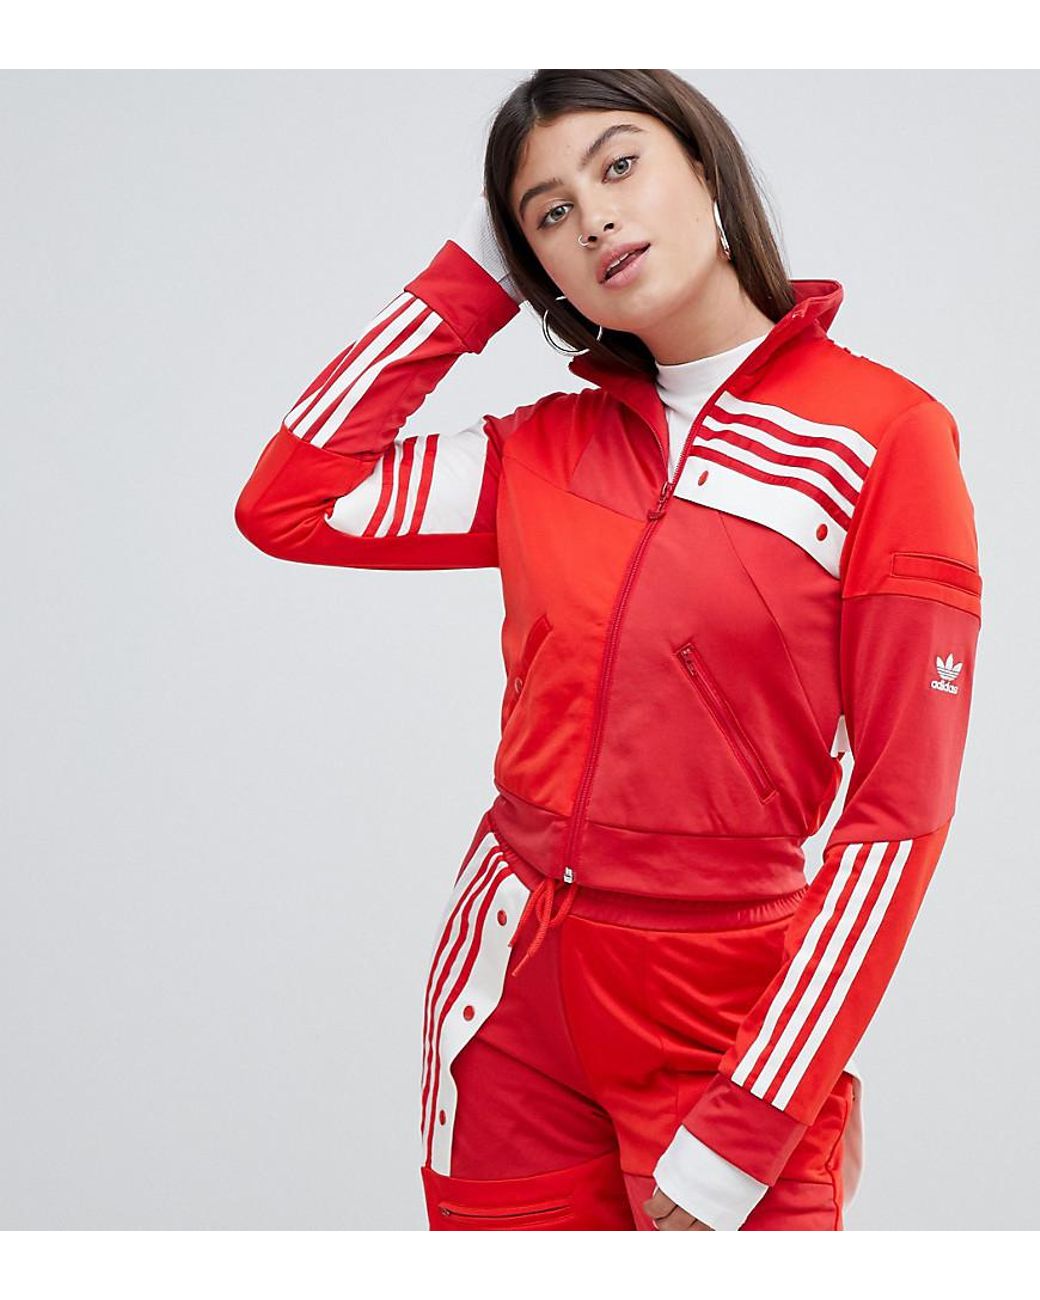 adidas Originals X Danielle Cathari Deconstructed Track Top In Red | Lyst